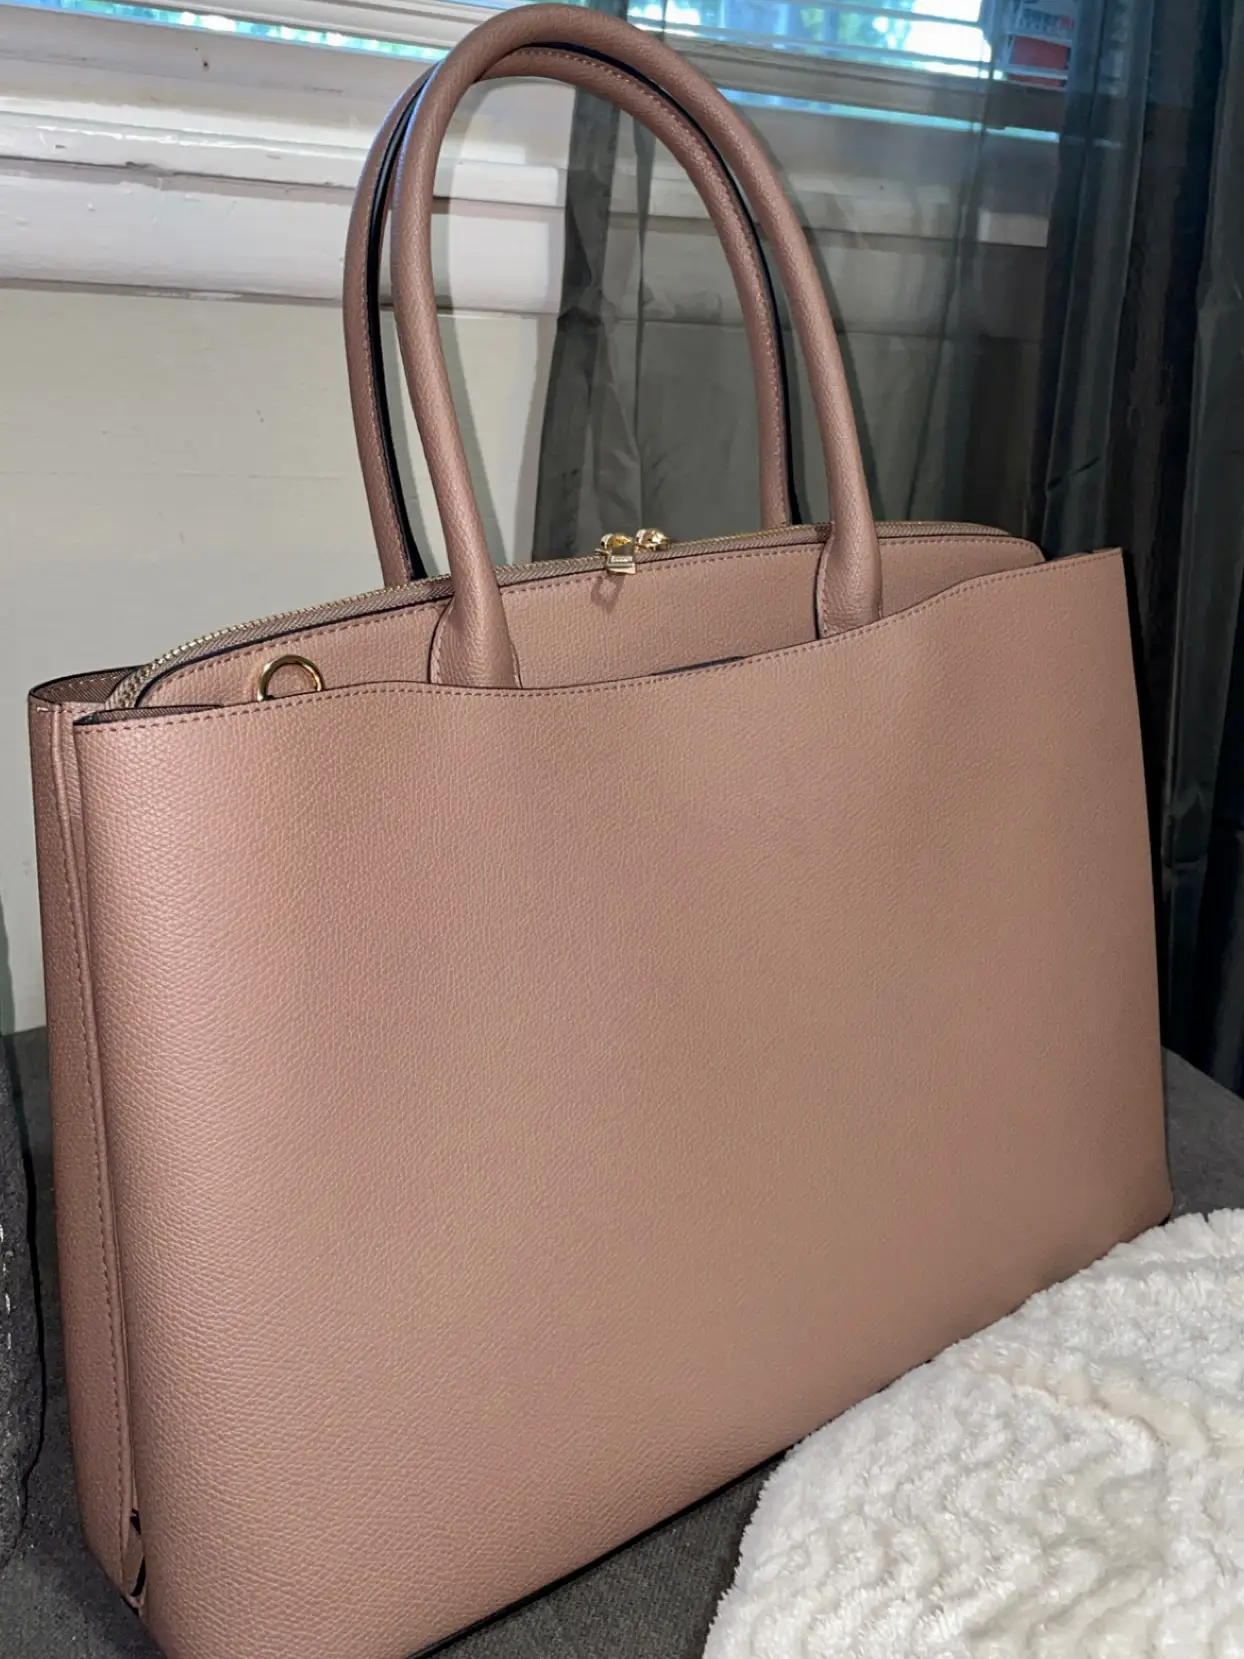 Saint Laurent Shopping Tote Review, Gallery posted by StephaniePernas